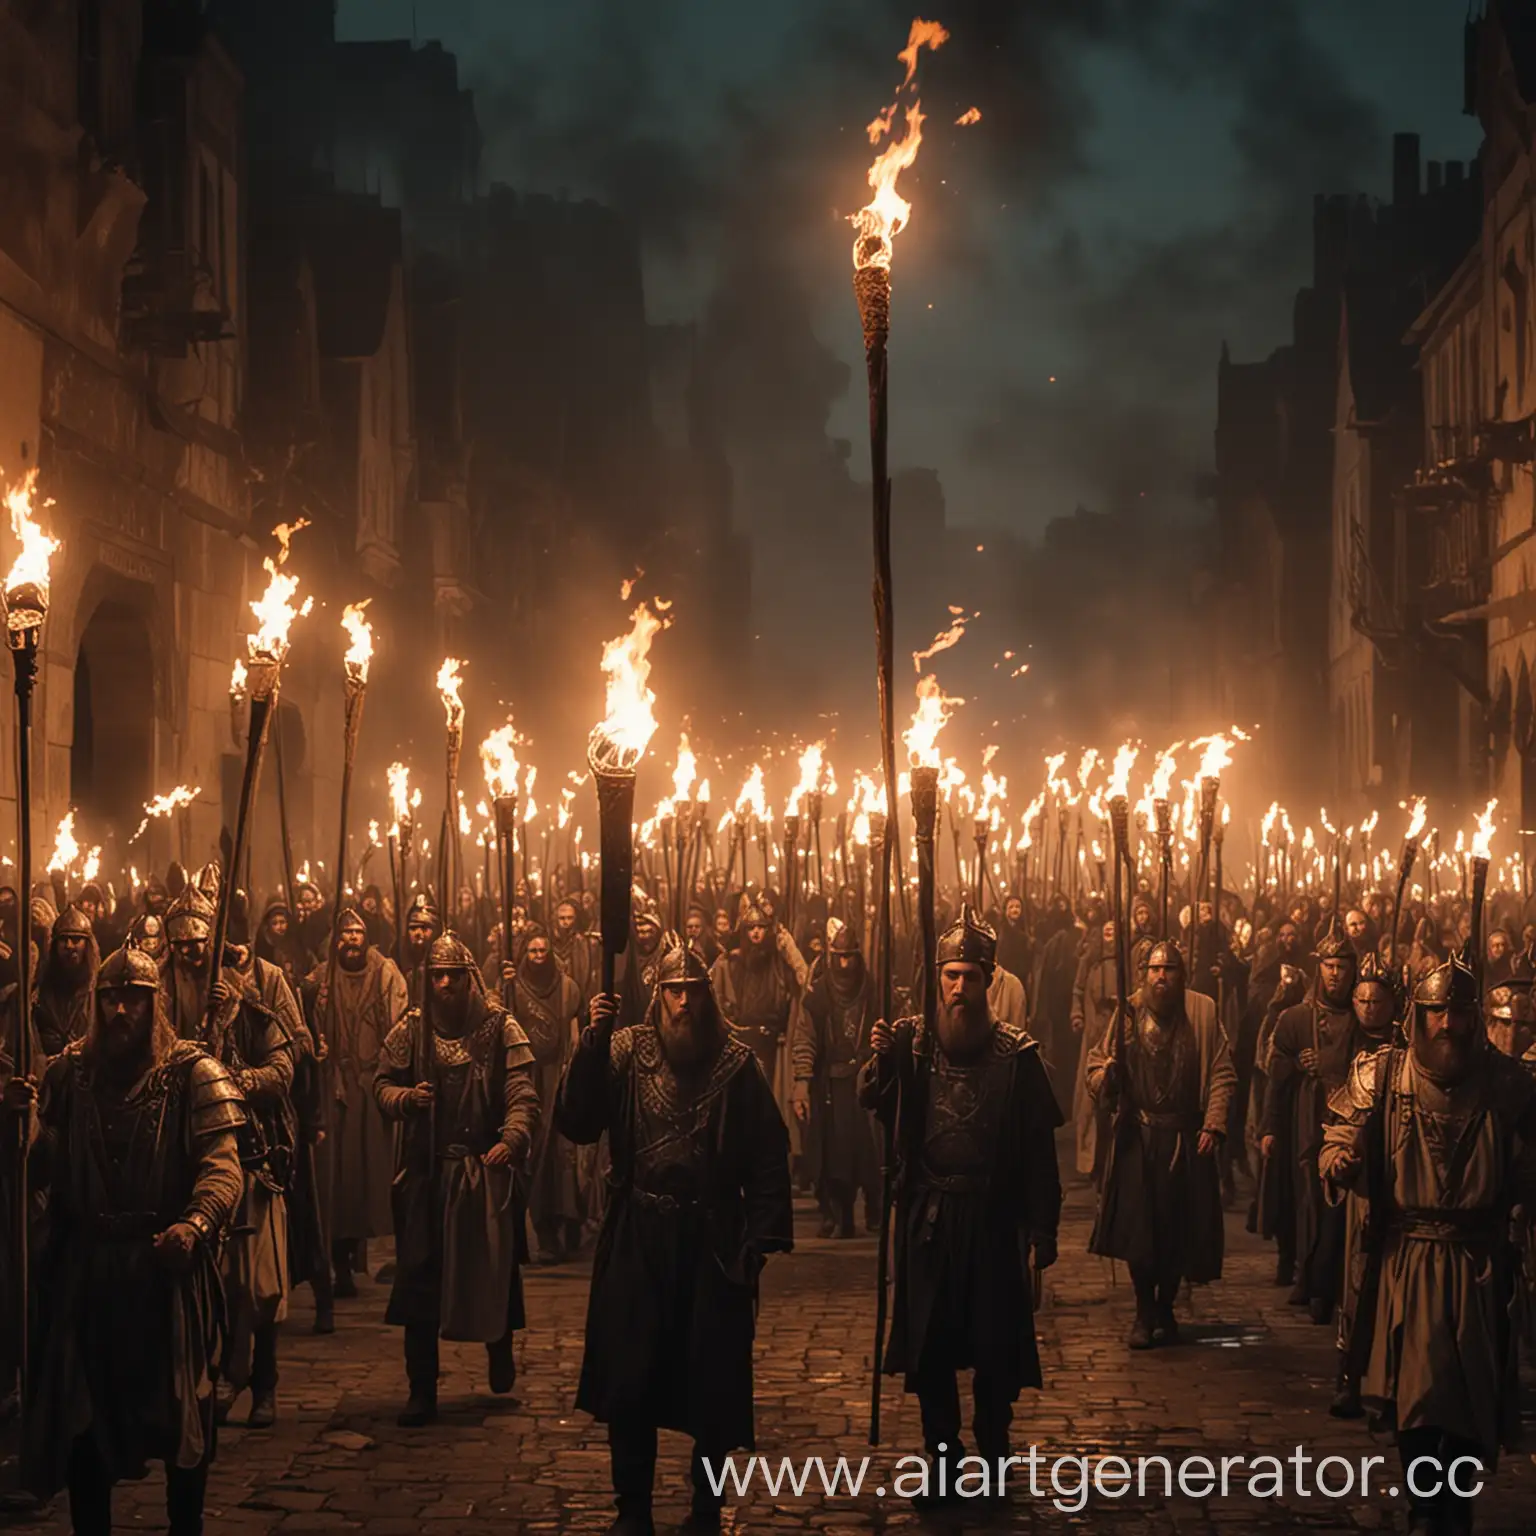 Night-Torch-Procession-Sons-of-Dawn-Overthrow-Tyrant